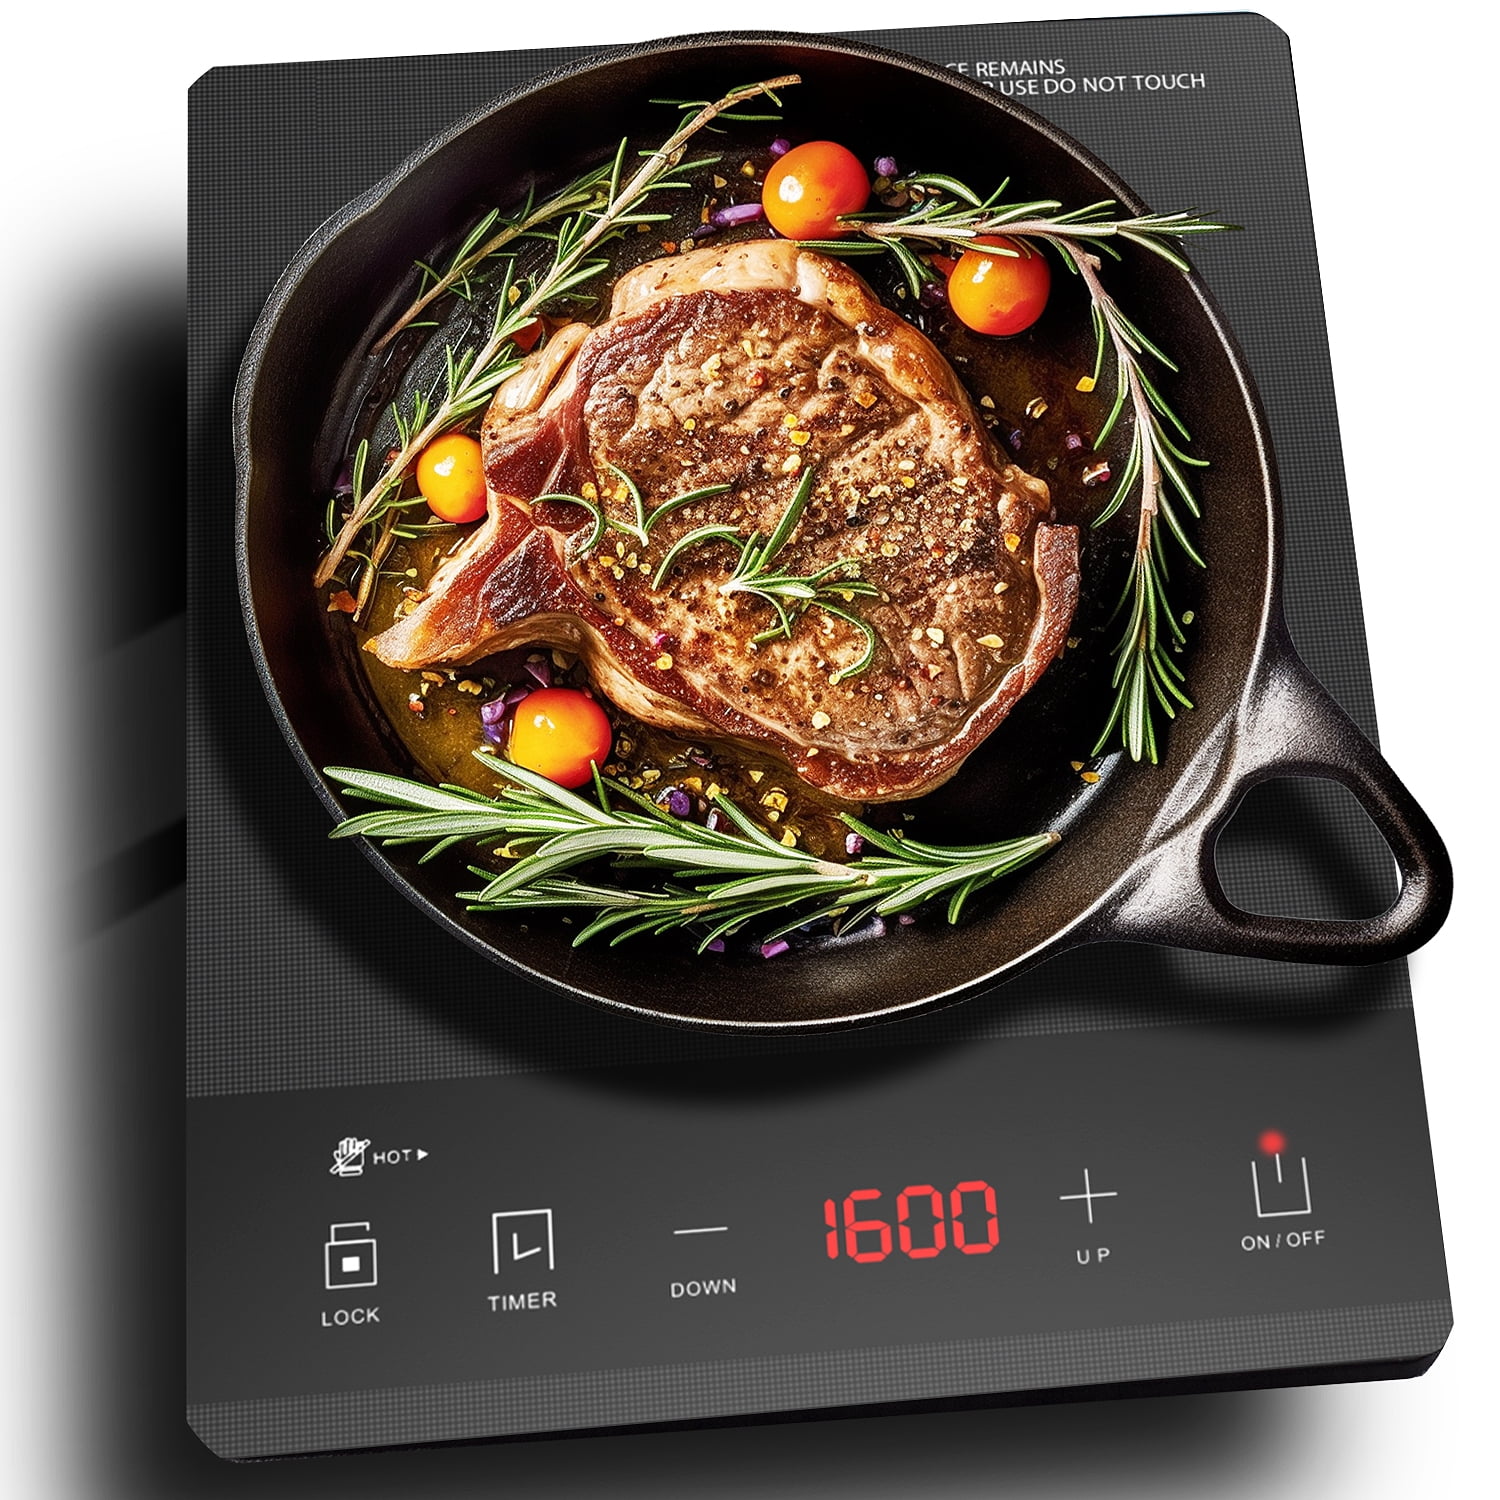 KOCONIC Upgraded to 1800W Single Burner,Electric Cooktop,Hot plate for  cooking,Electric Stove With Timer and Touch Control,No Radiation to Protect